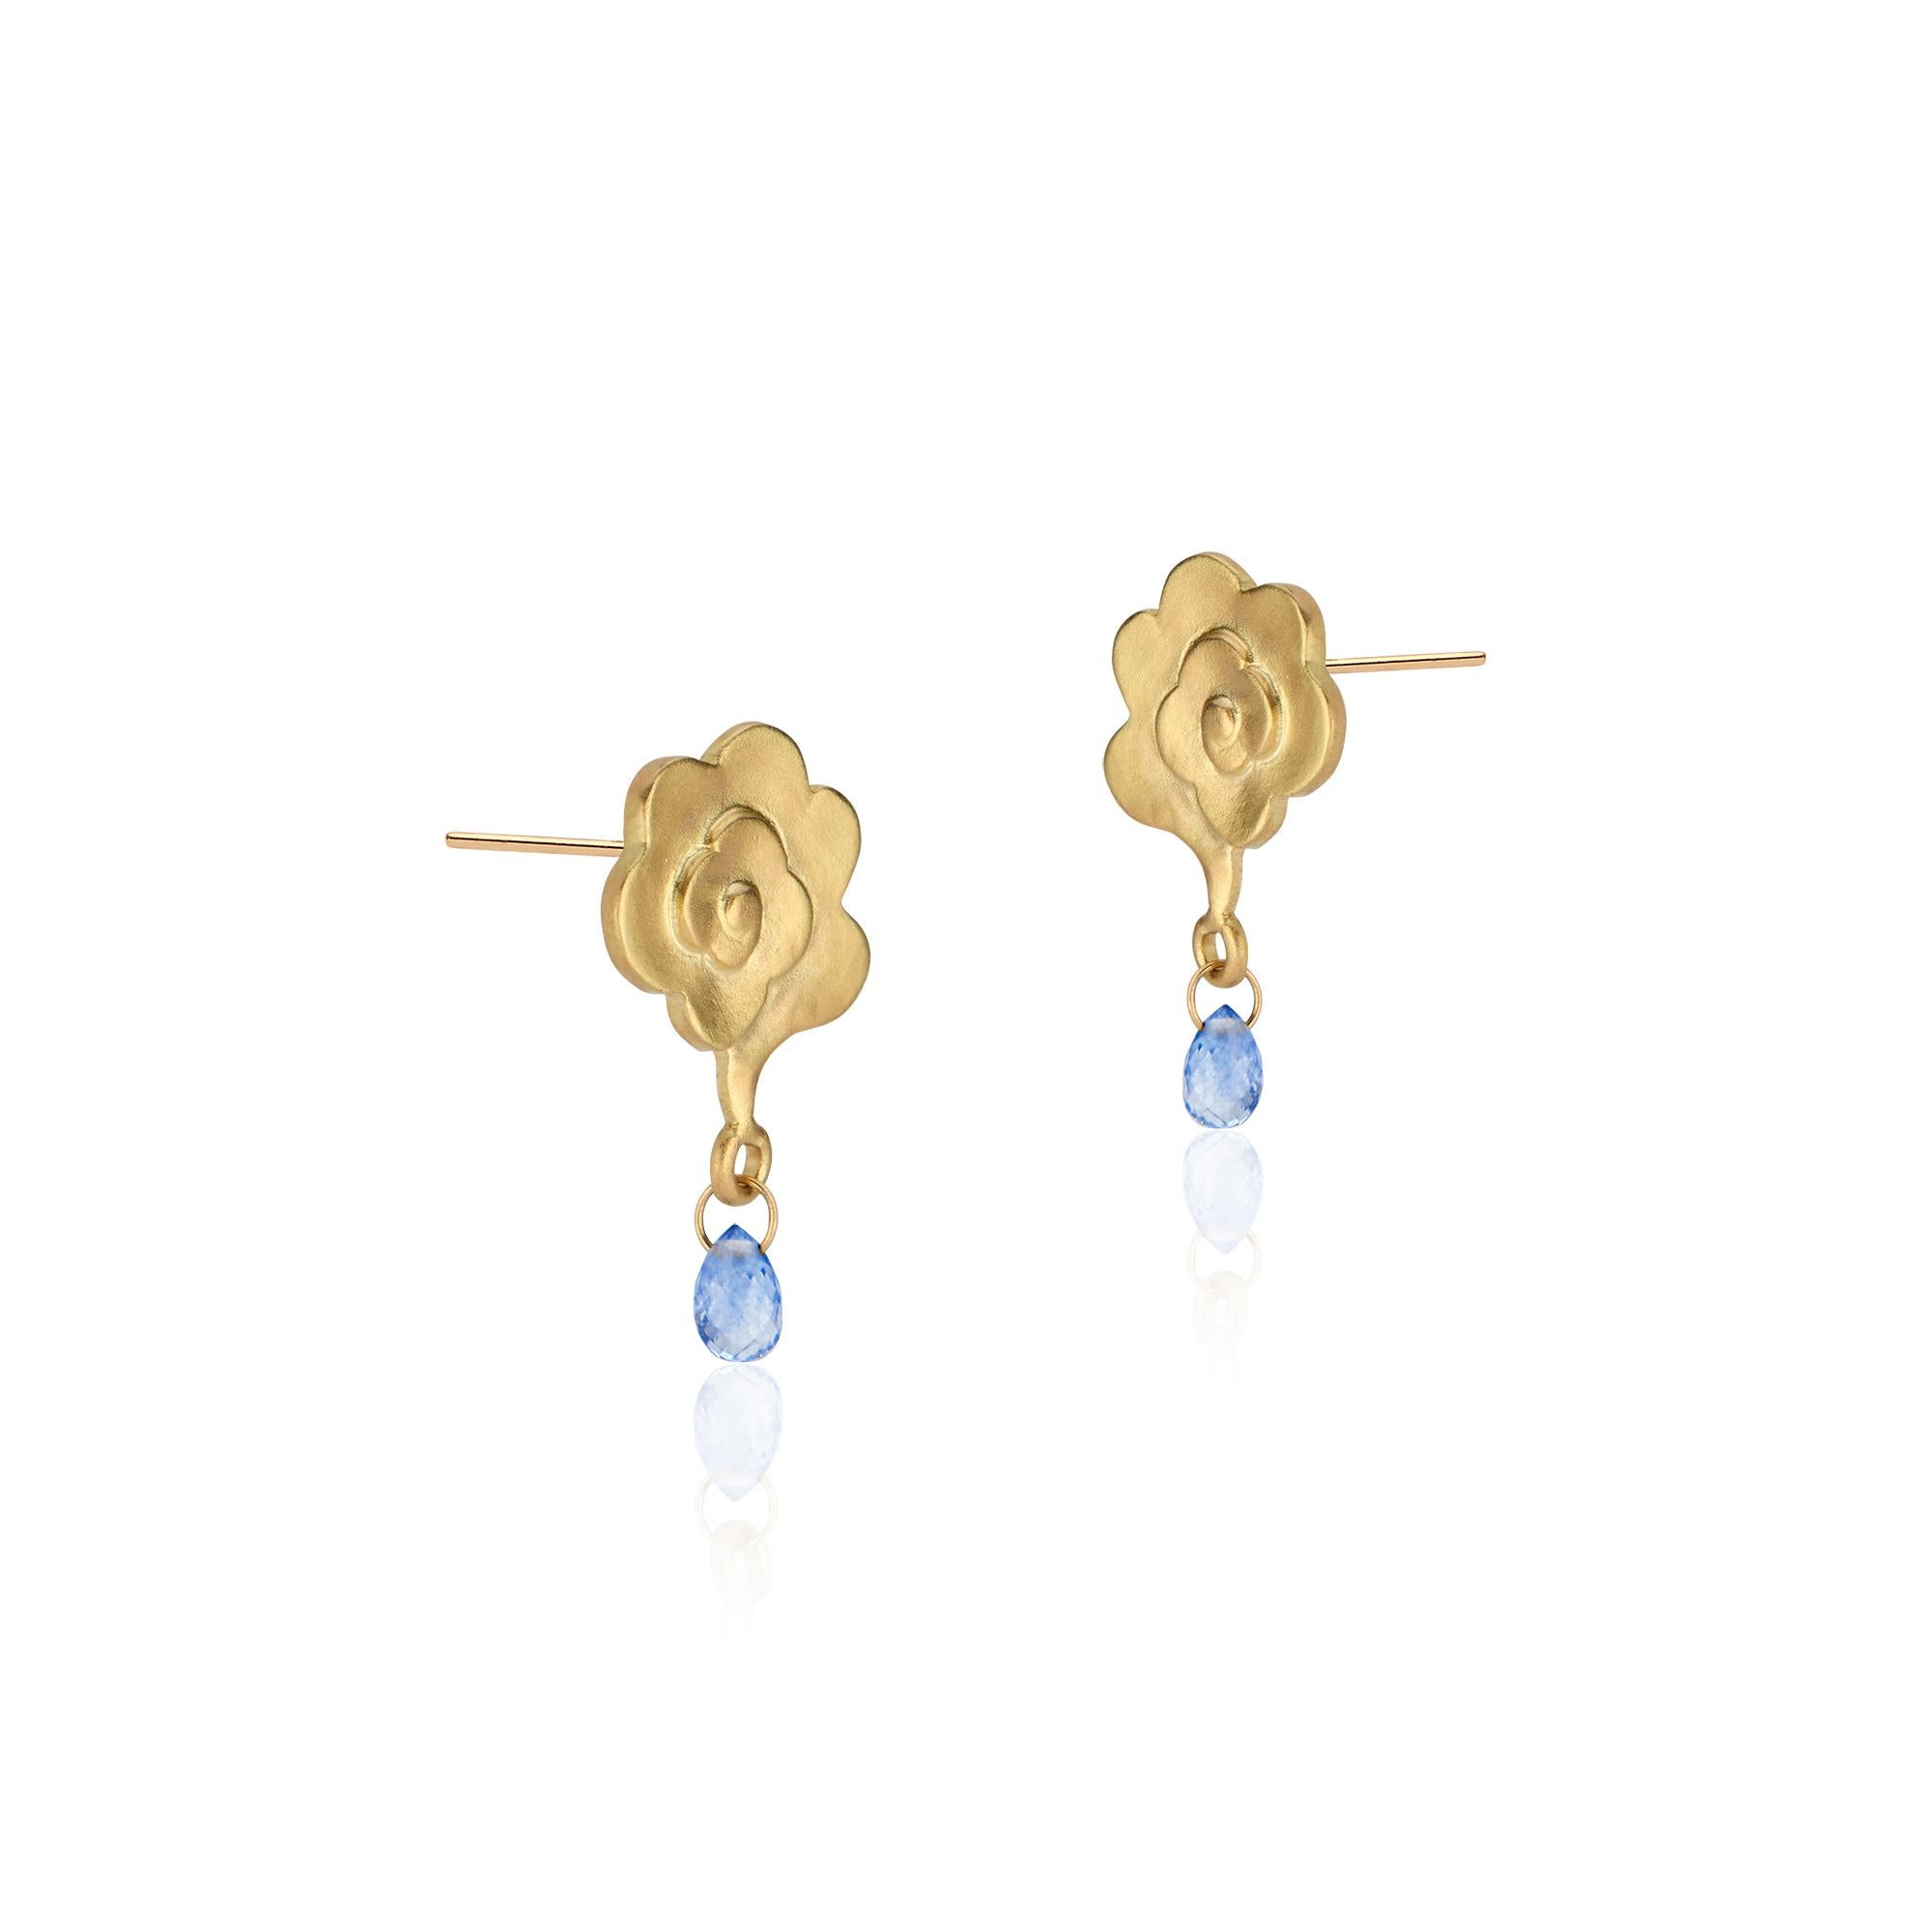 Blue sapphire raindrops dangle from 18k matte rain cloud earrings. Handcrafted by Susan Mancuso of Forge & Foundry Jewels.

Into each life, some rain must fall. And that can be a good thing.